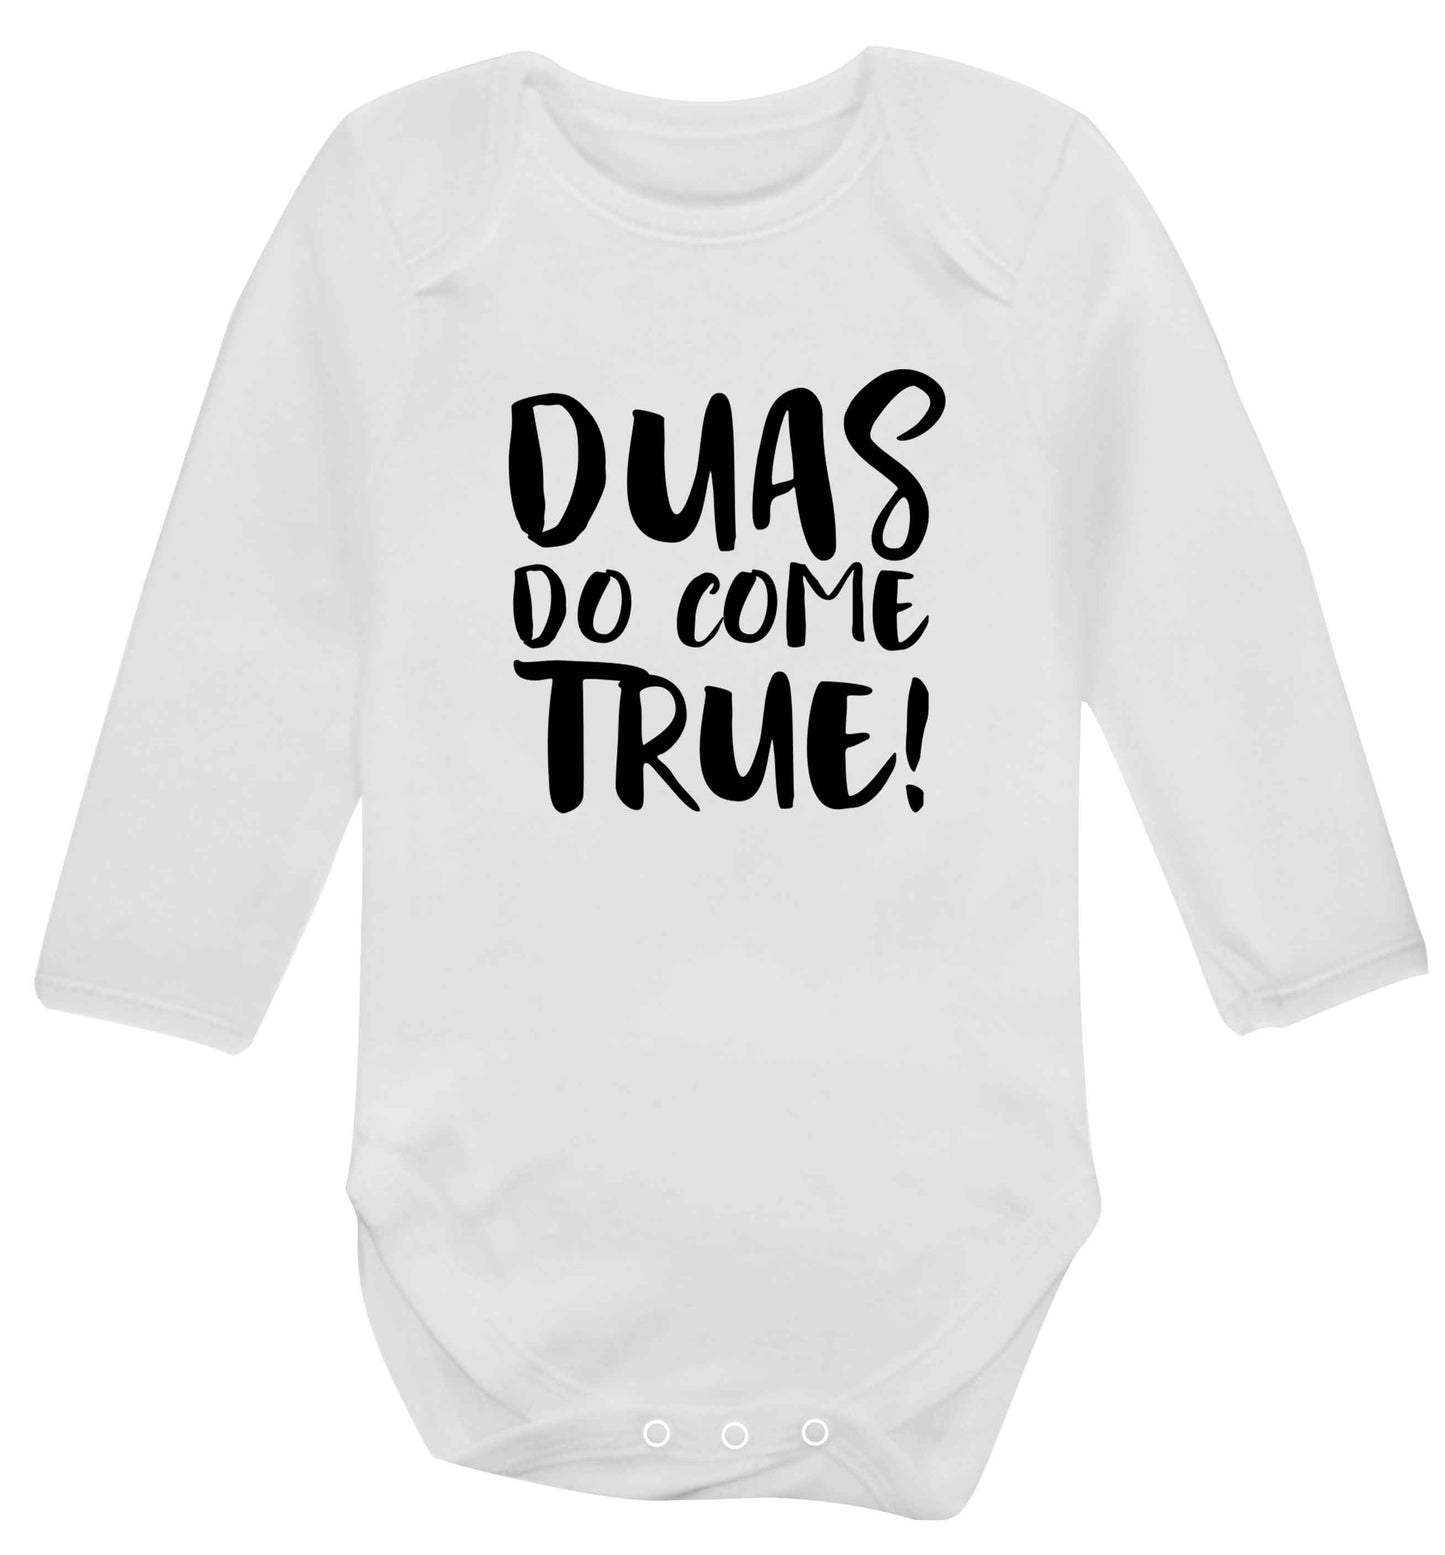 Duas do come true baby vest long sleeved white 6-12 months